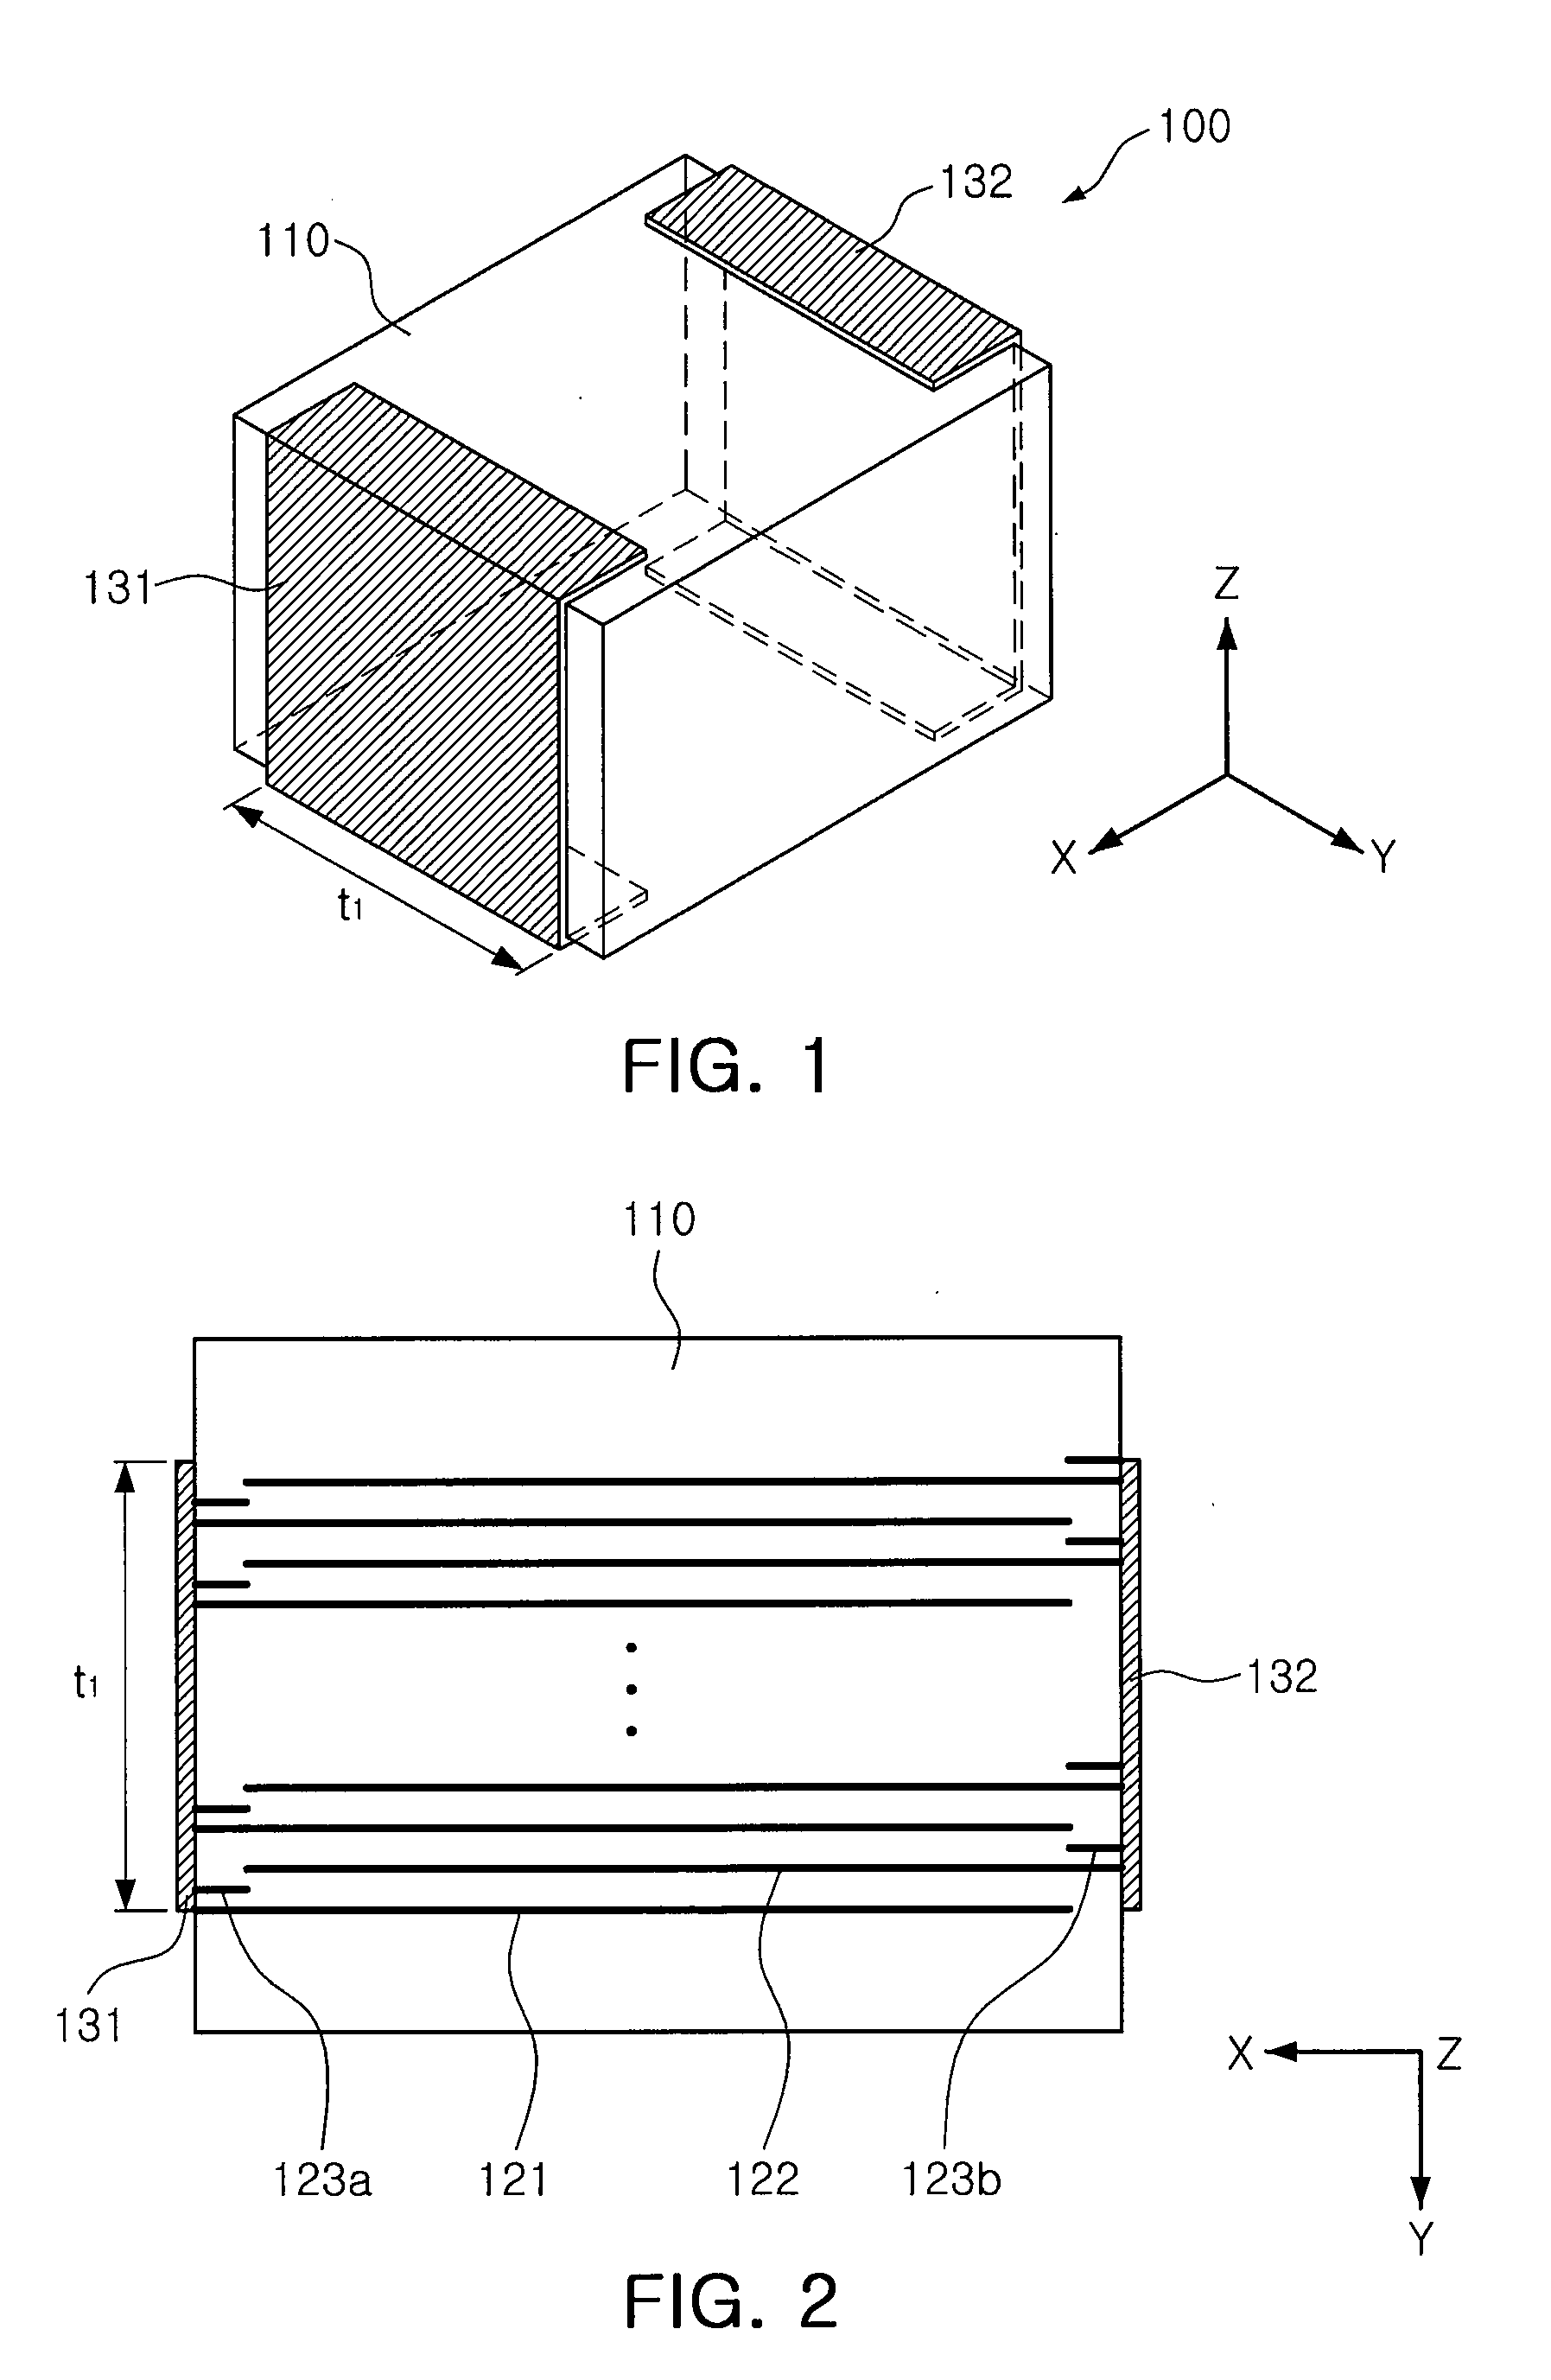 Multilayer chip capacitor and circuit board device